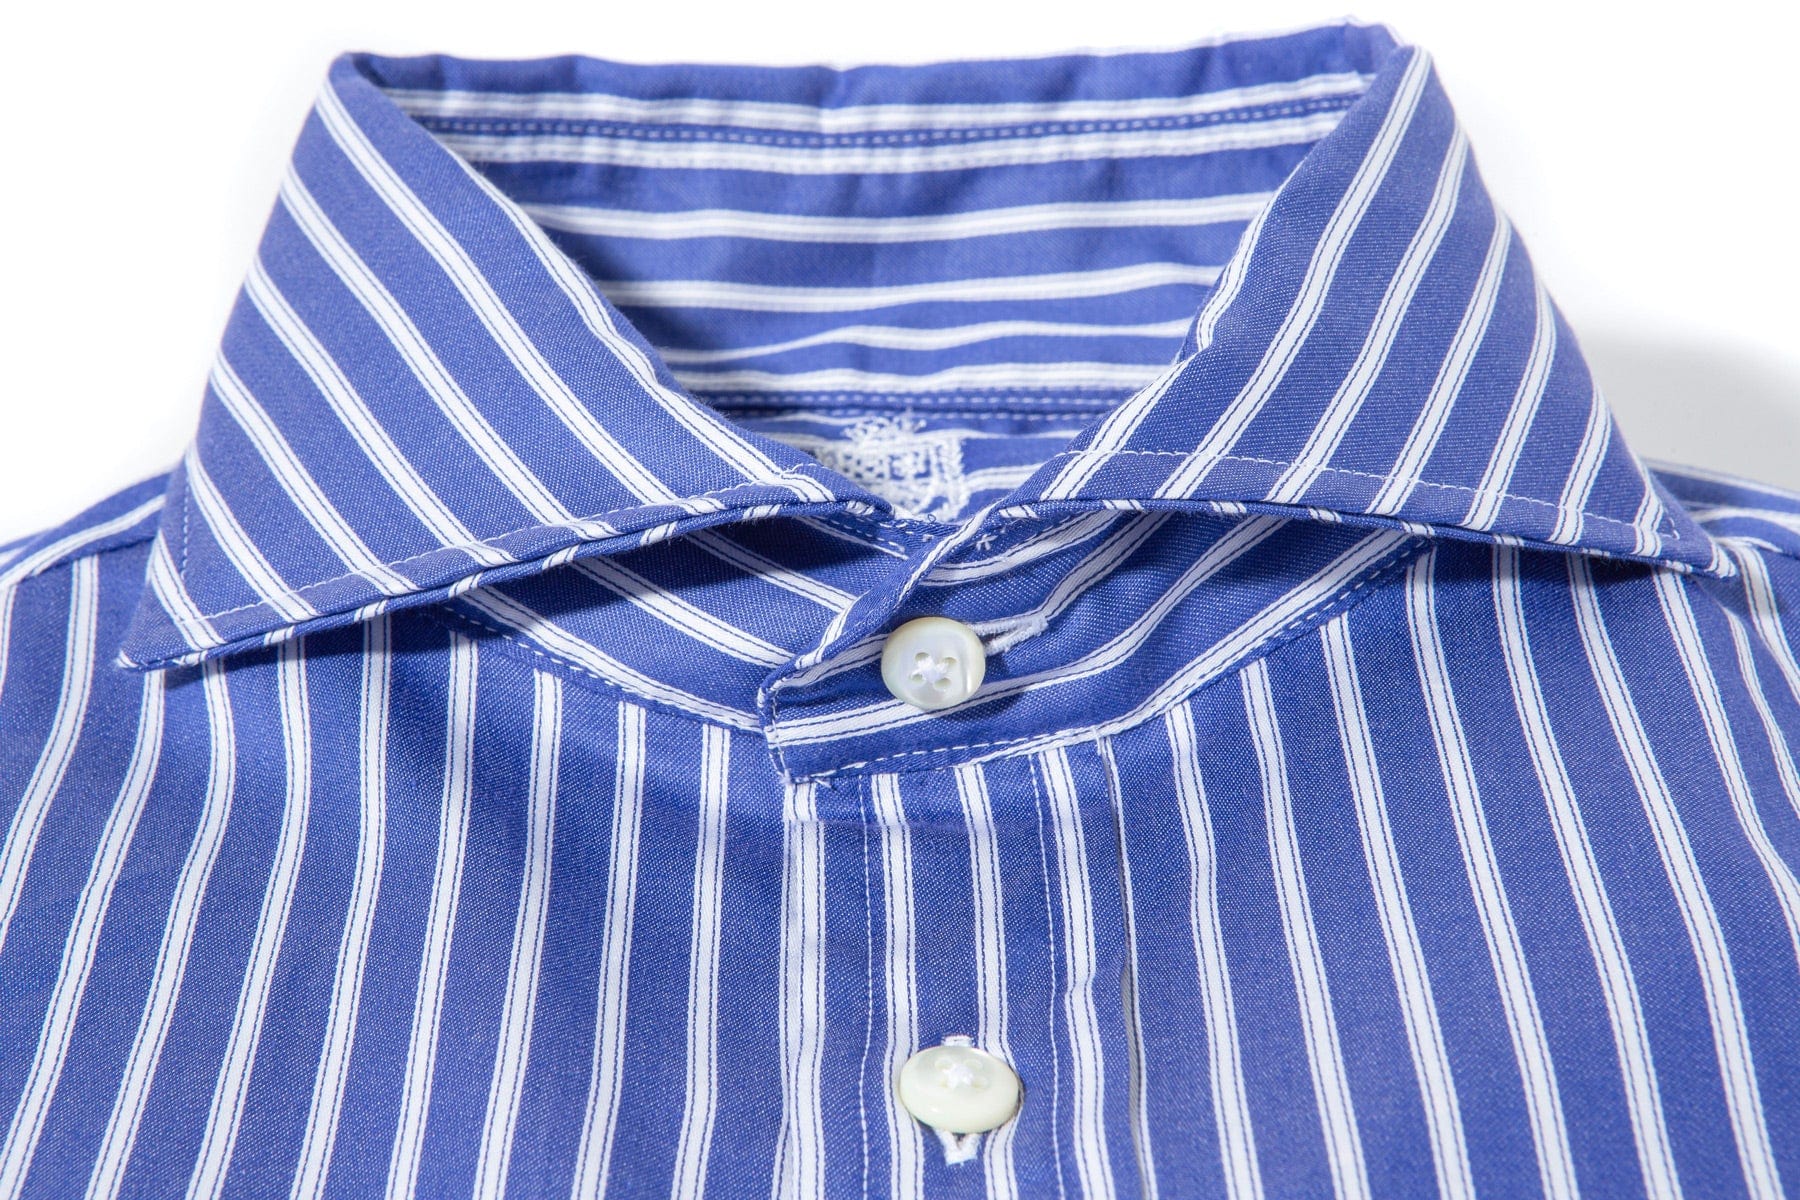 Carrera Cotton Speed shirt In Blue and White - AXEL'S